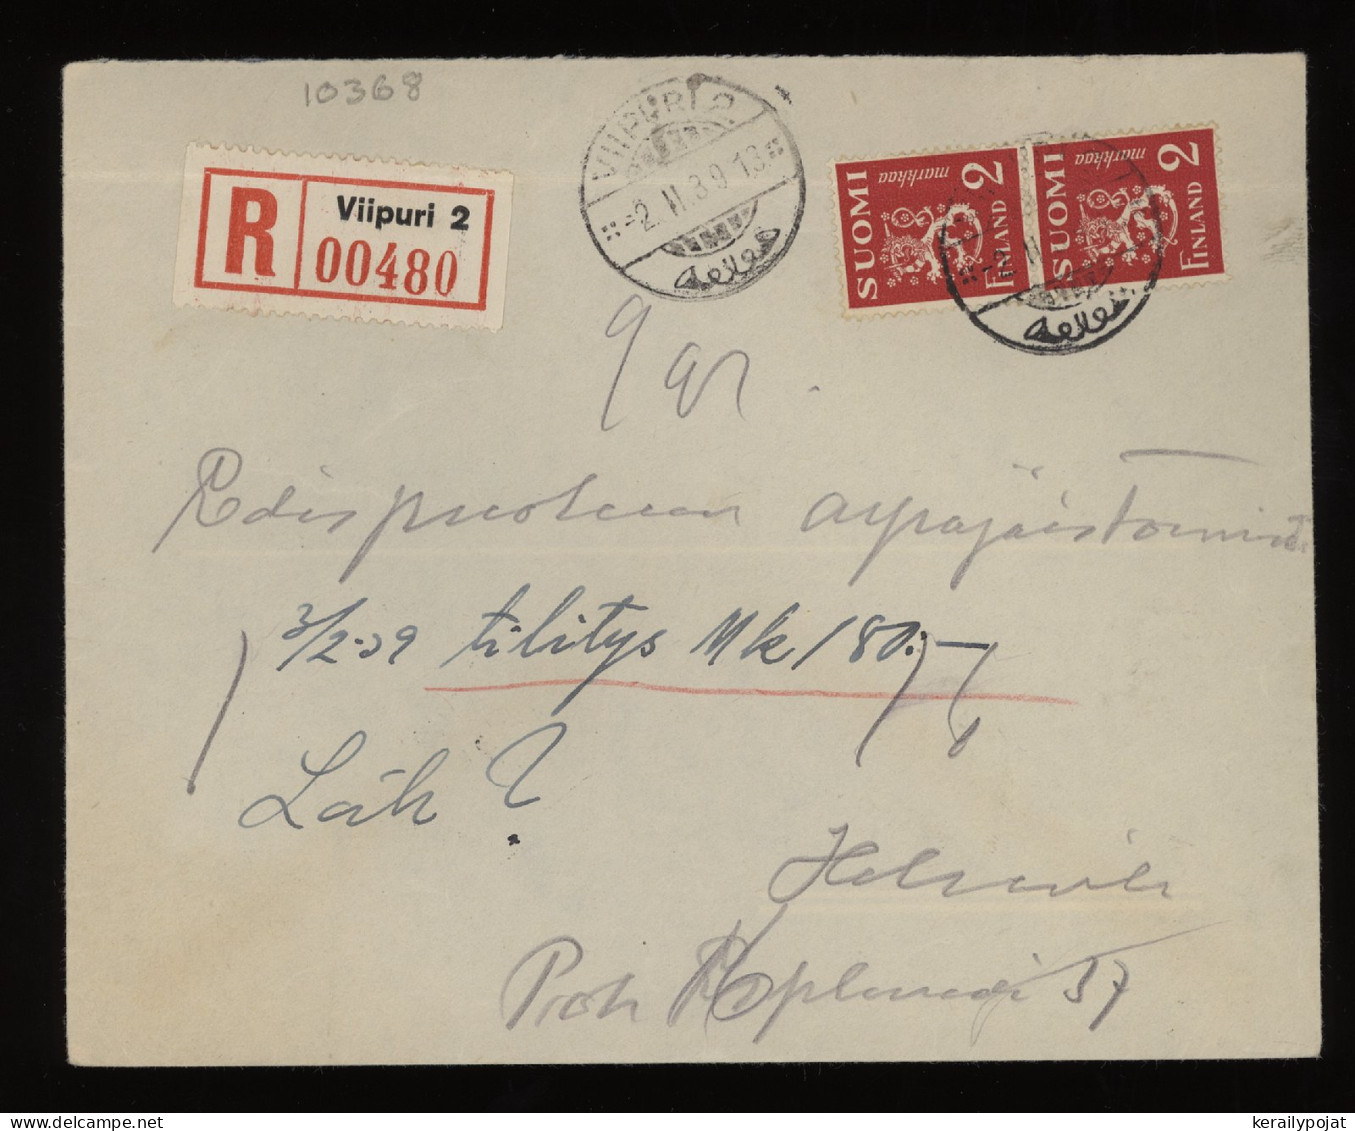 Finland 1939 Viipuri 2 Registered Cover__(10368) - Covers & Documents